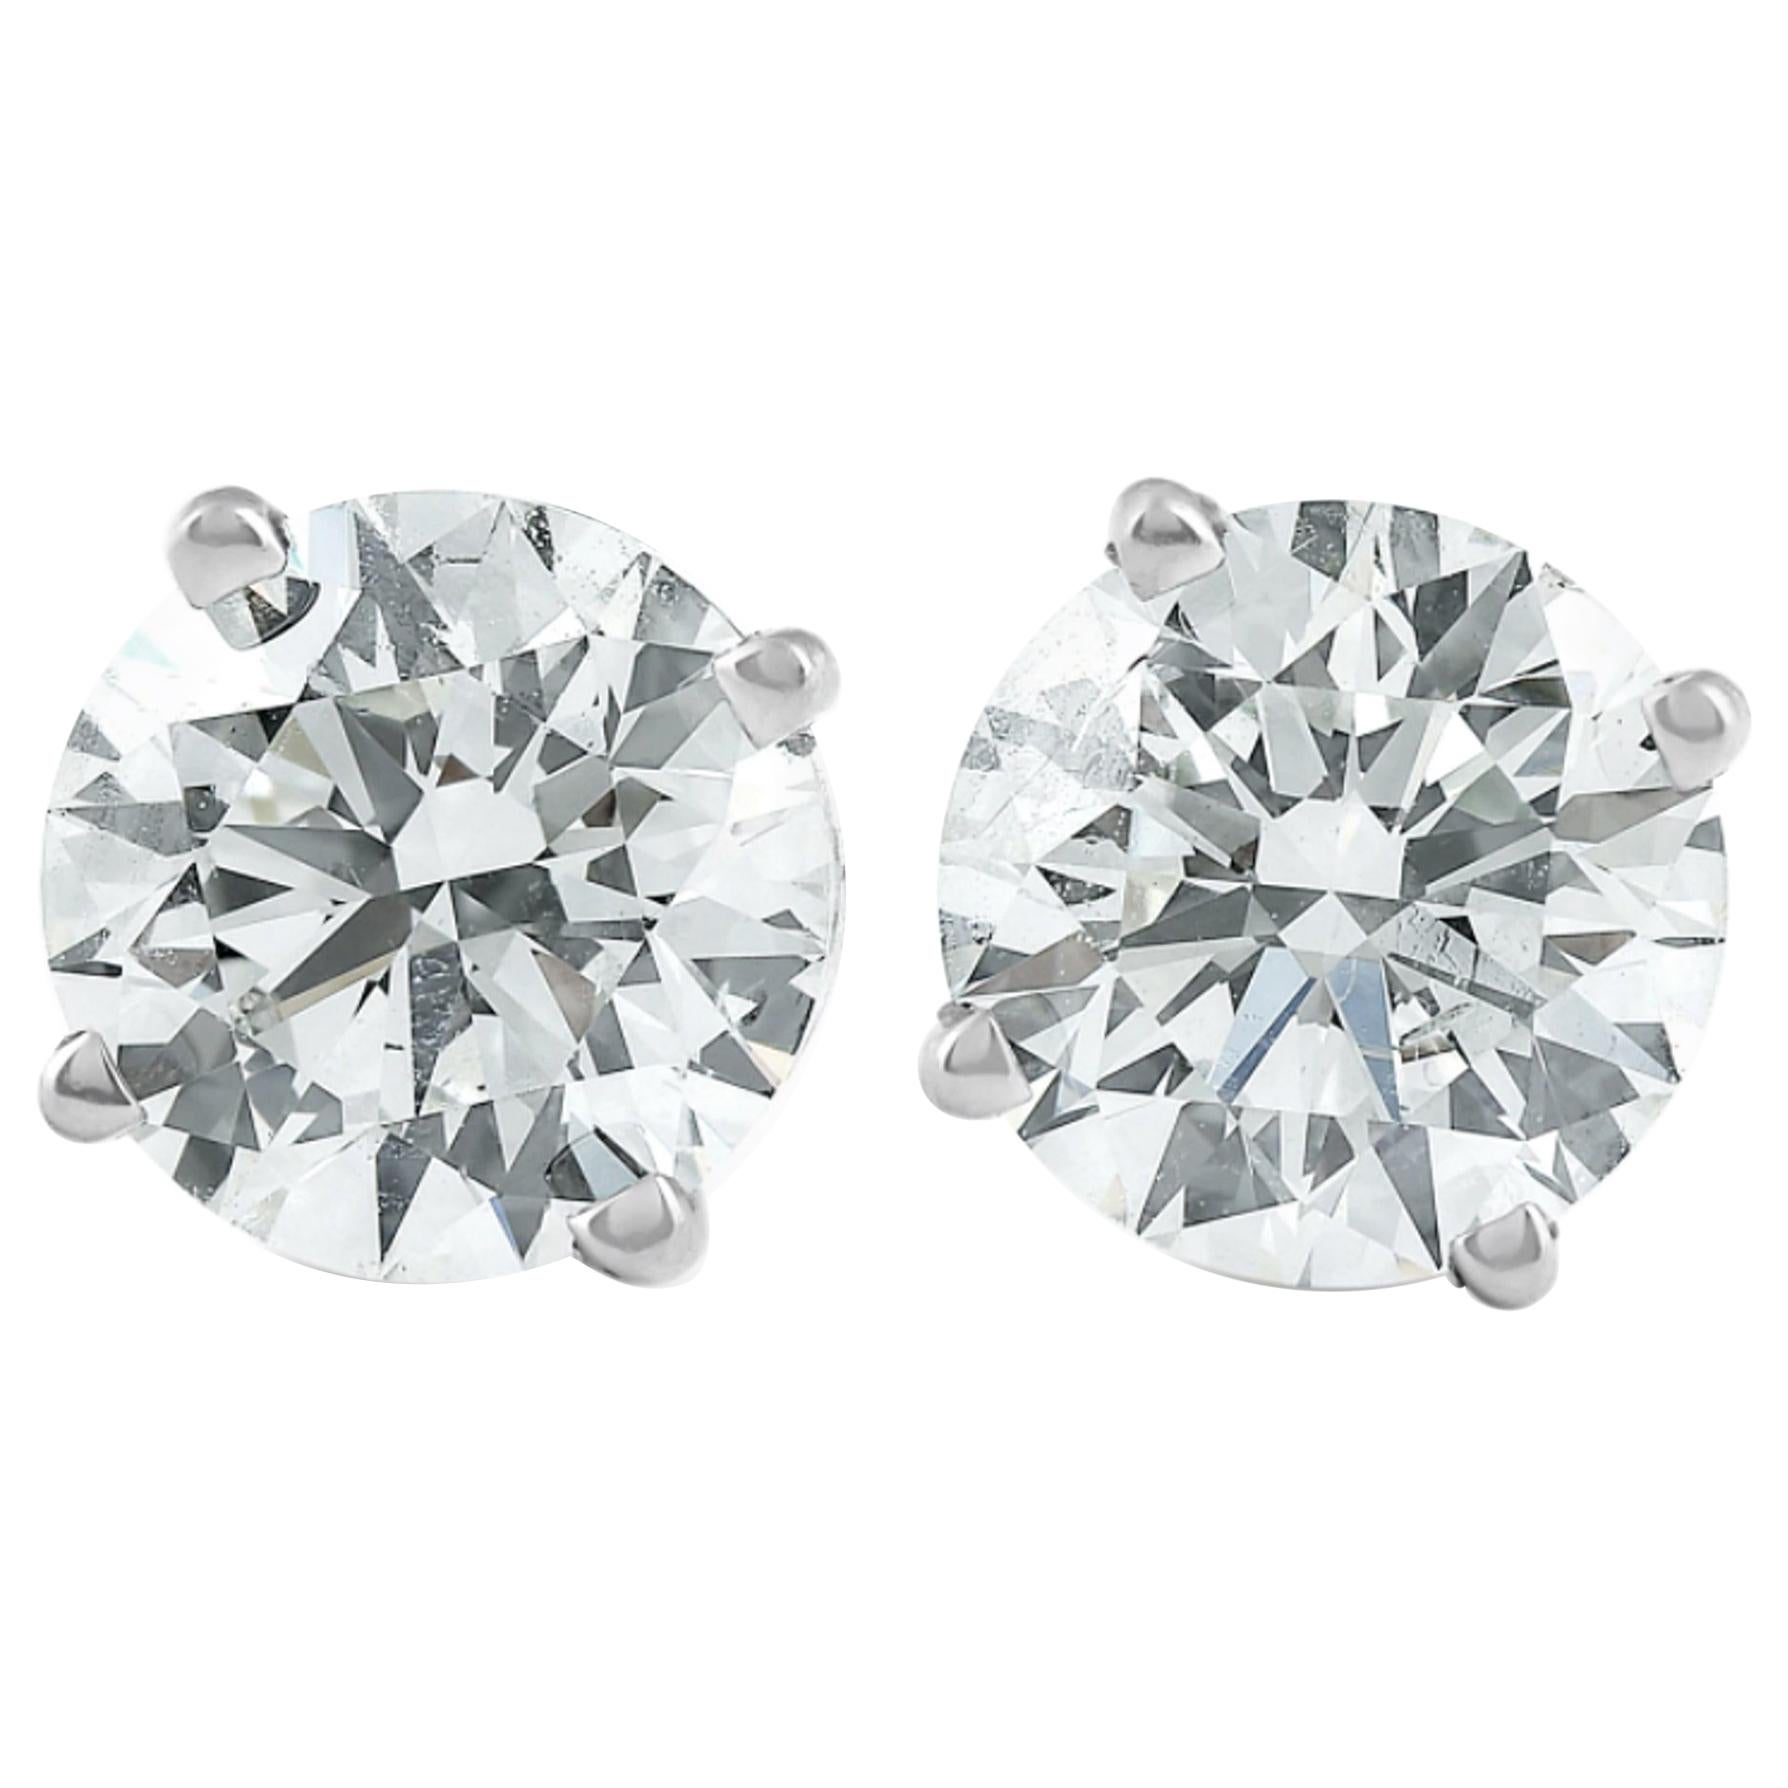 4 Carat Certified Diamond Studs 100% Natural Earth Mined Excellent Cut